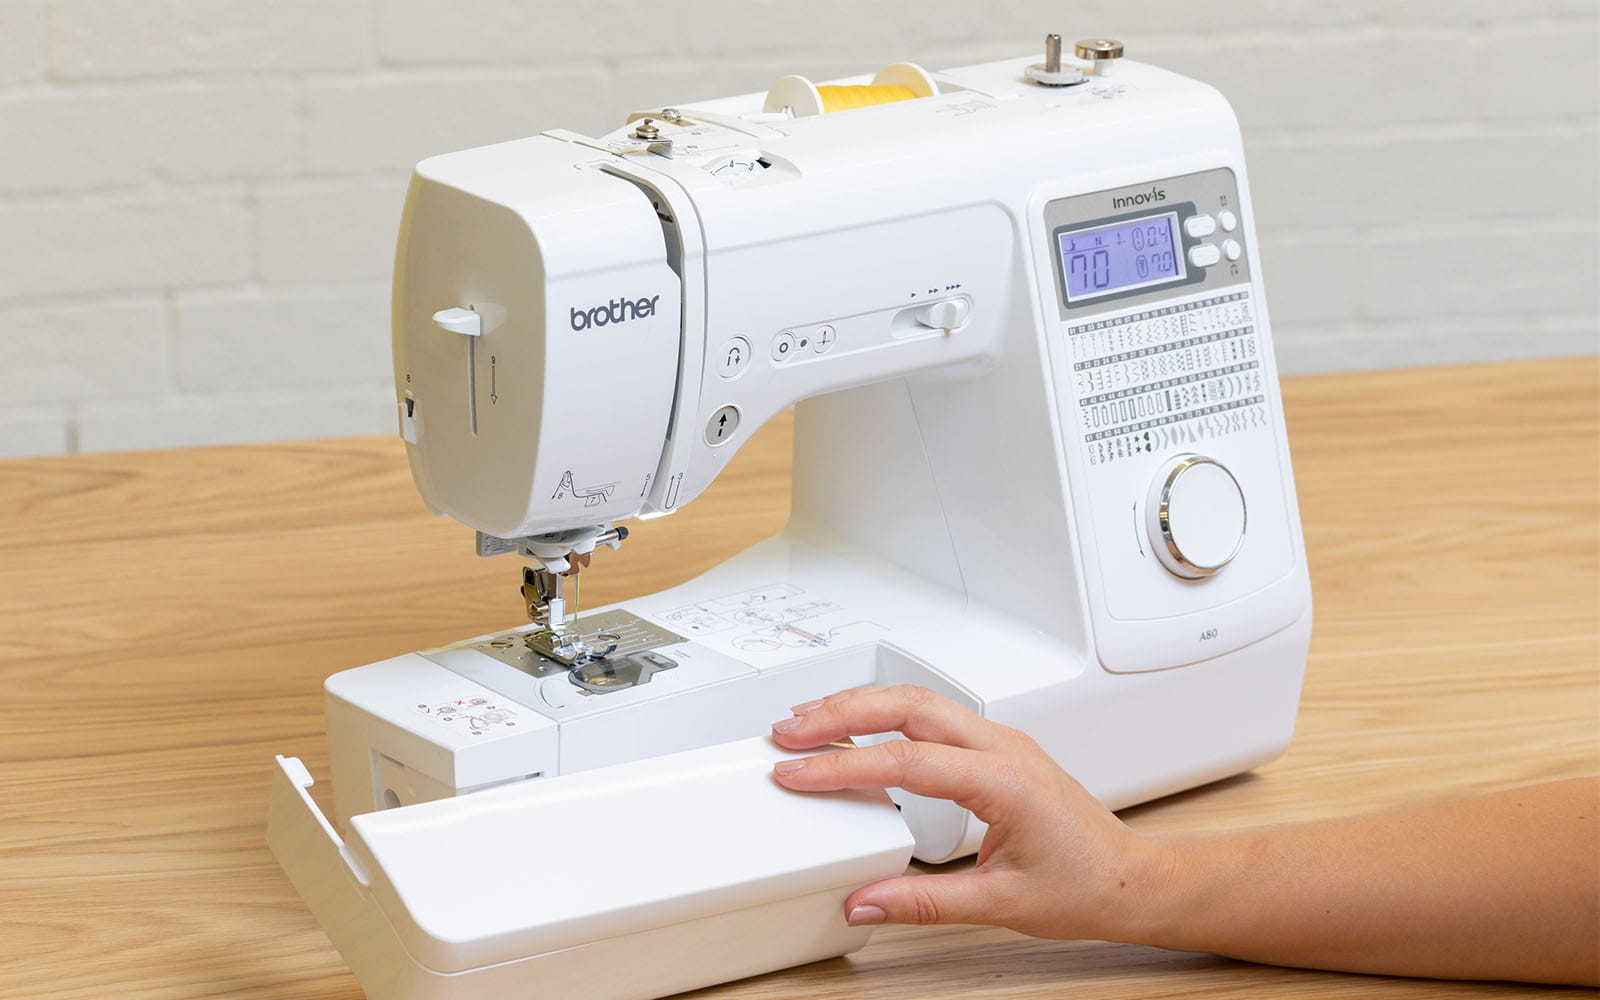 Removing accessory compartment on sewing machine